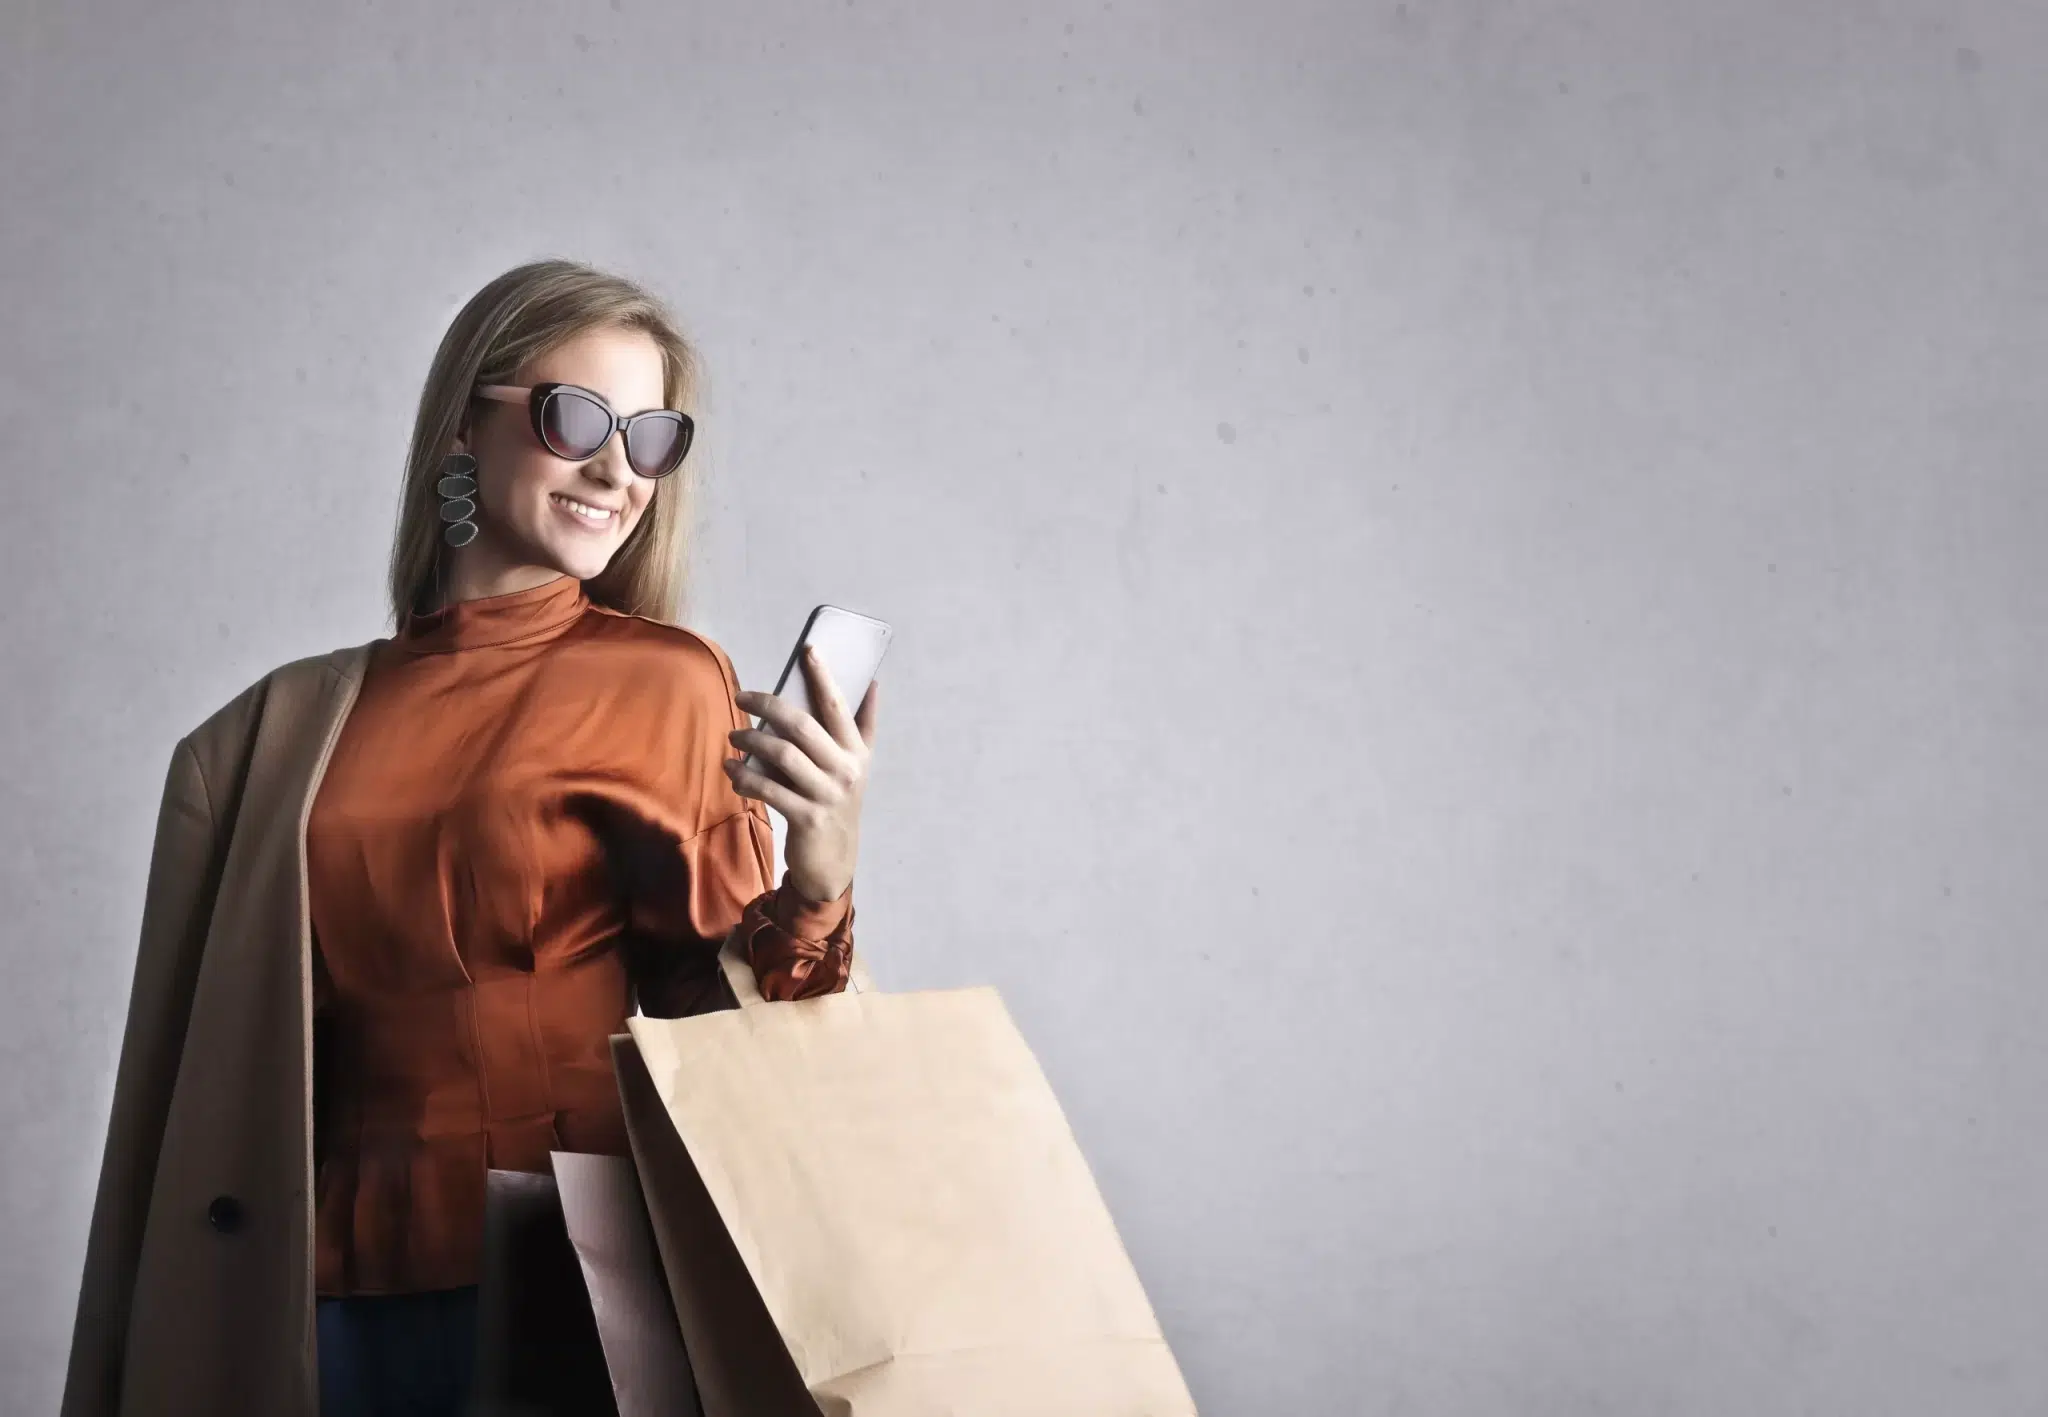 Woman went shopping wearing a sunglass and holding a phone.